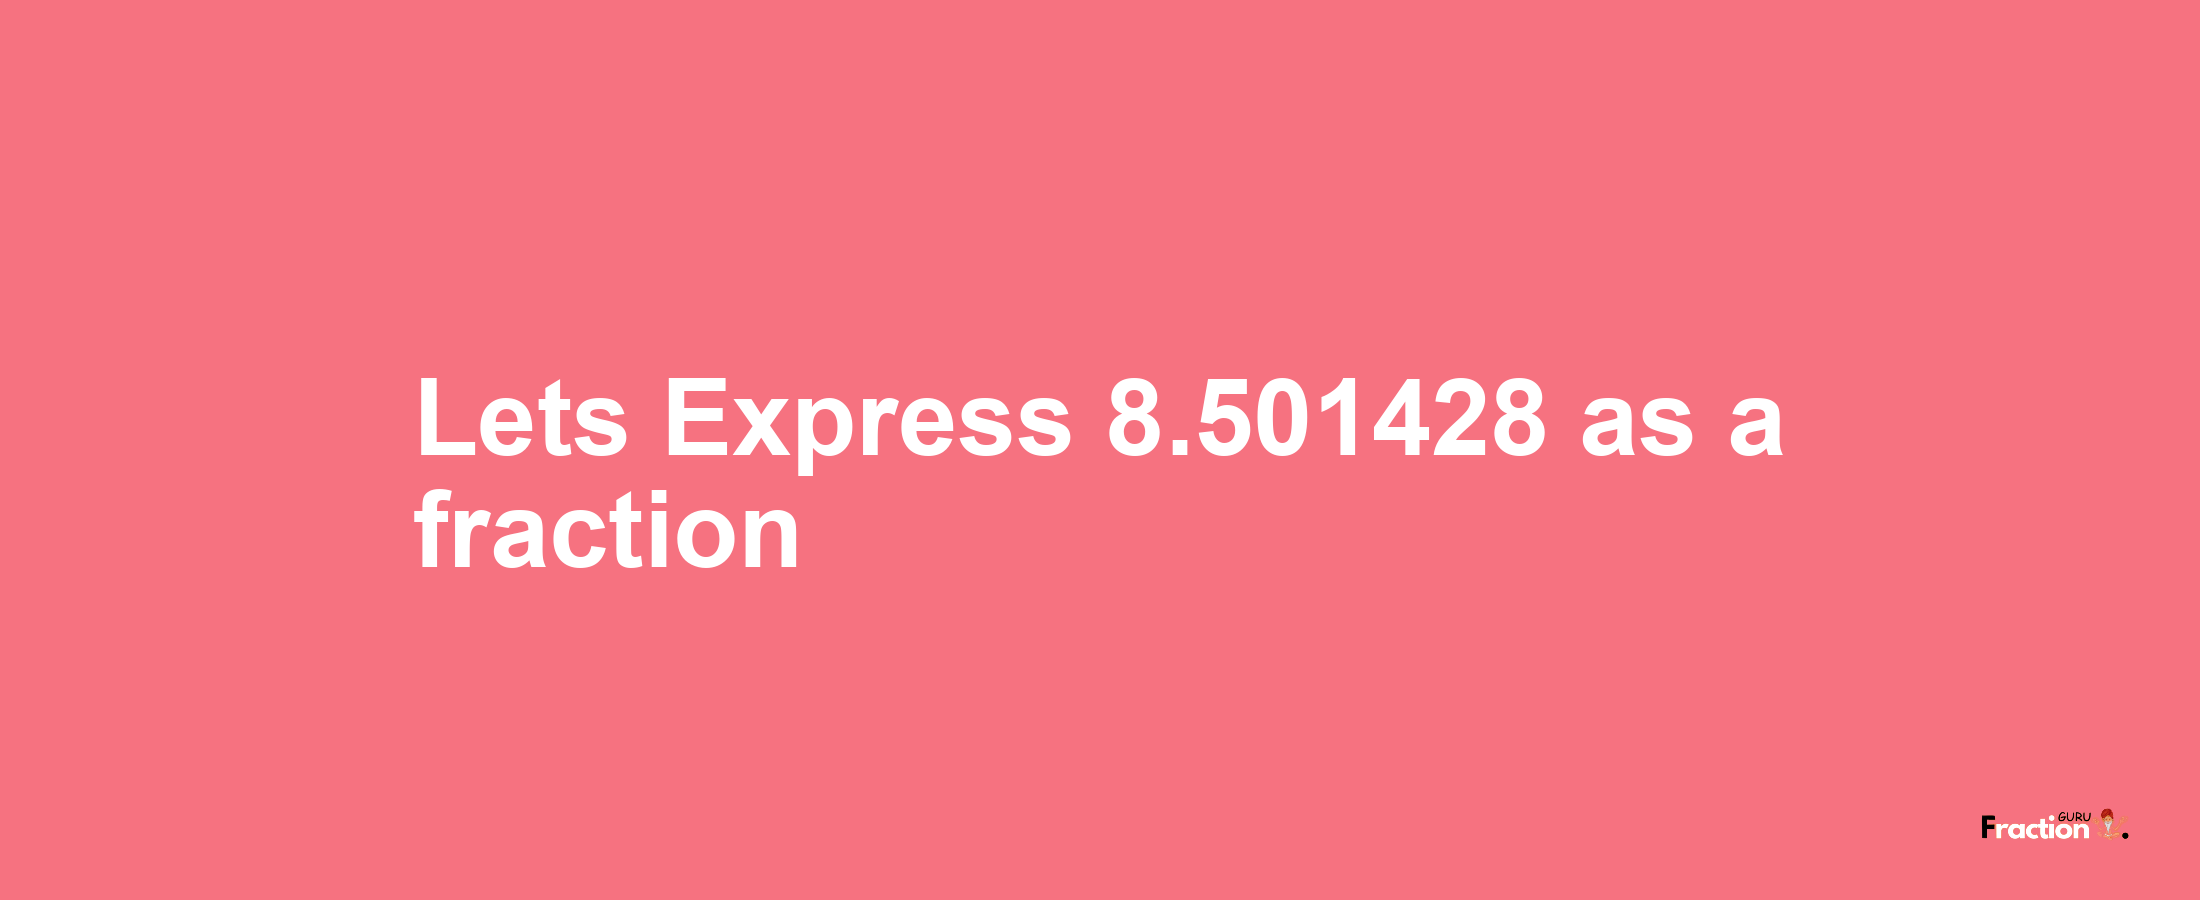 Lets Express 8.501428 as afraction